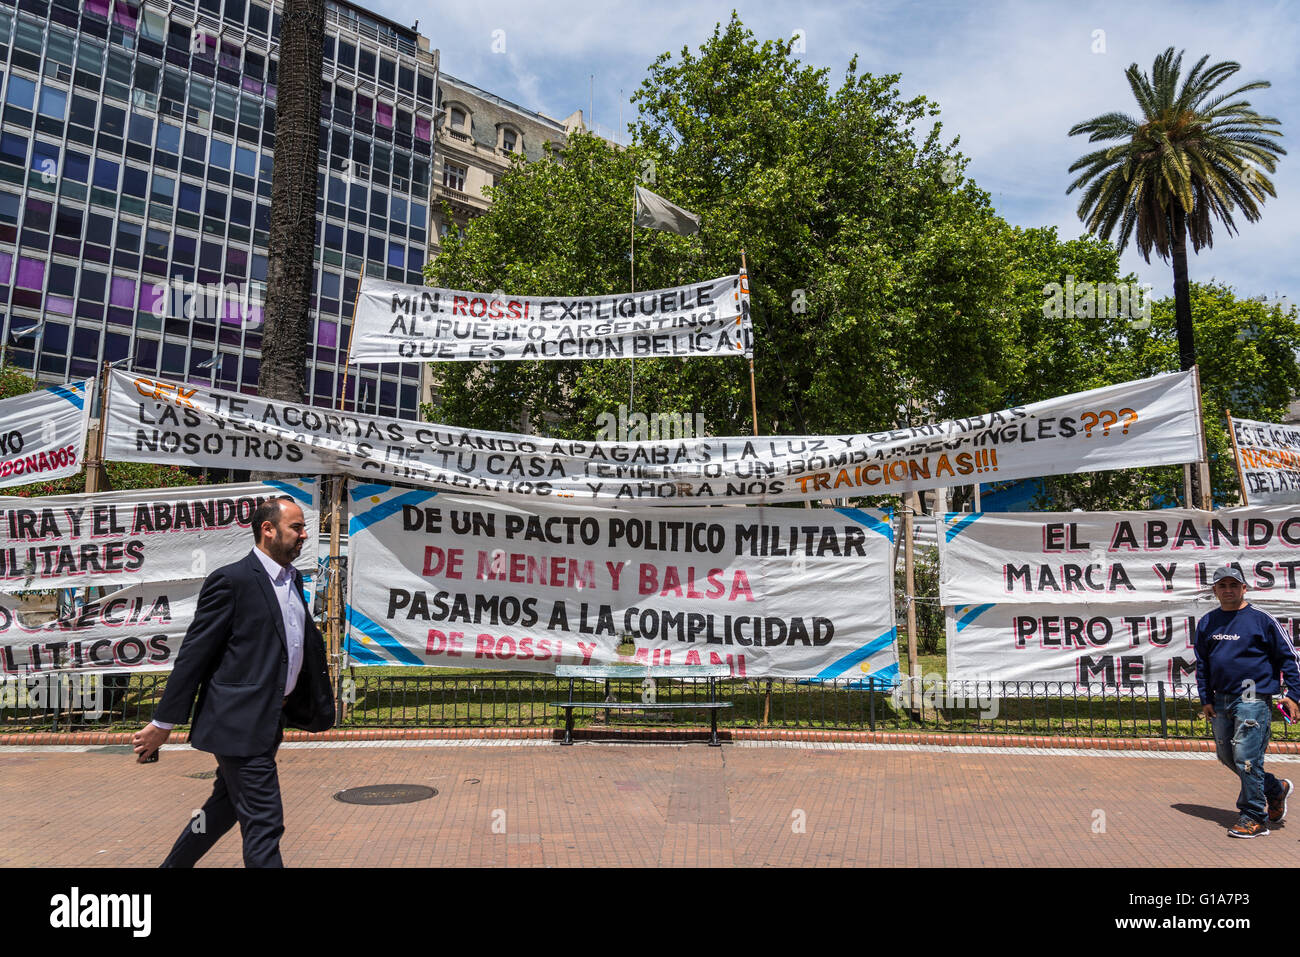 Political protest banners, Plaza de Mayo, May Square, Buenos Aires, Argentina Stock Photo